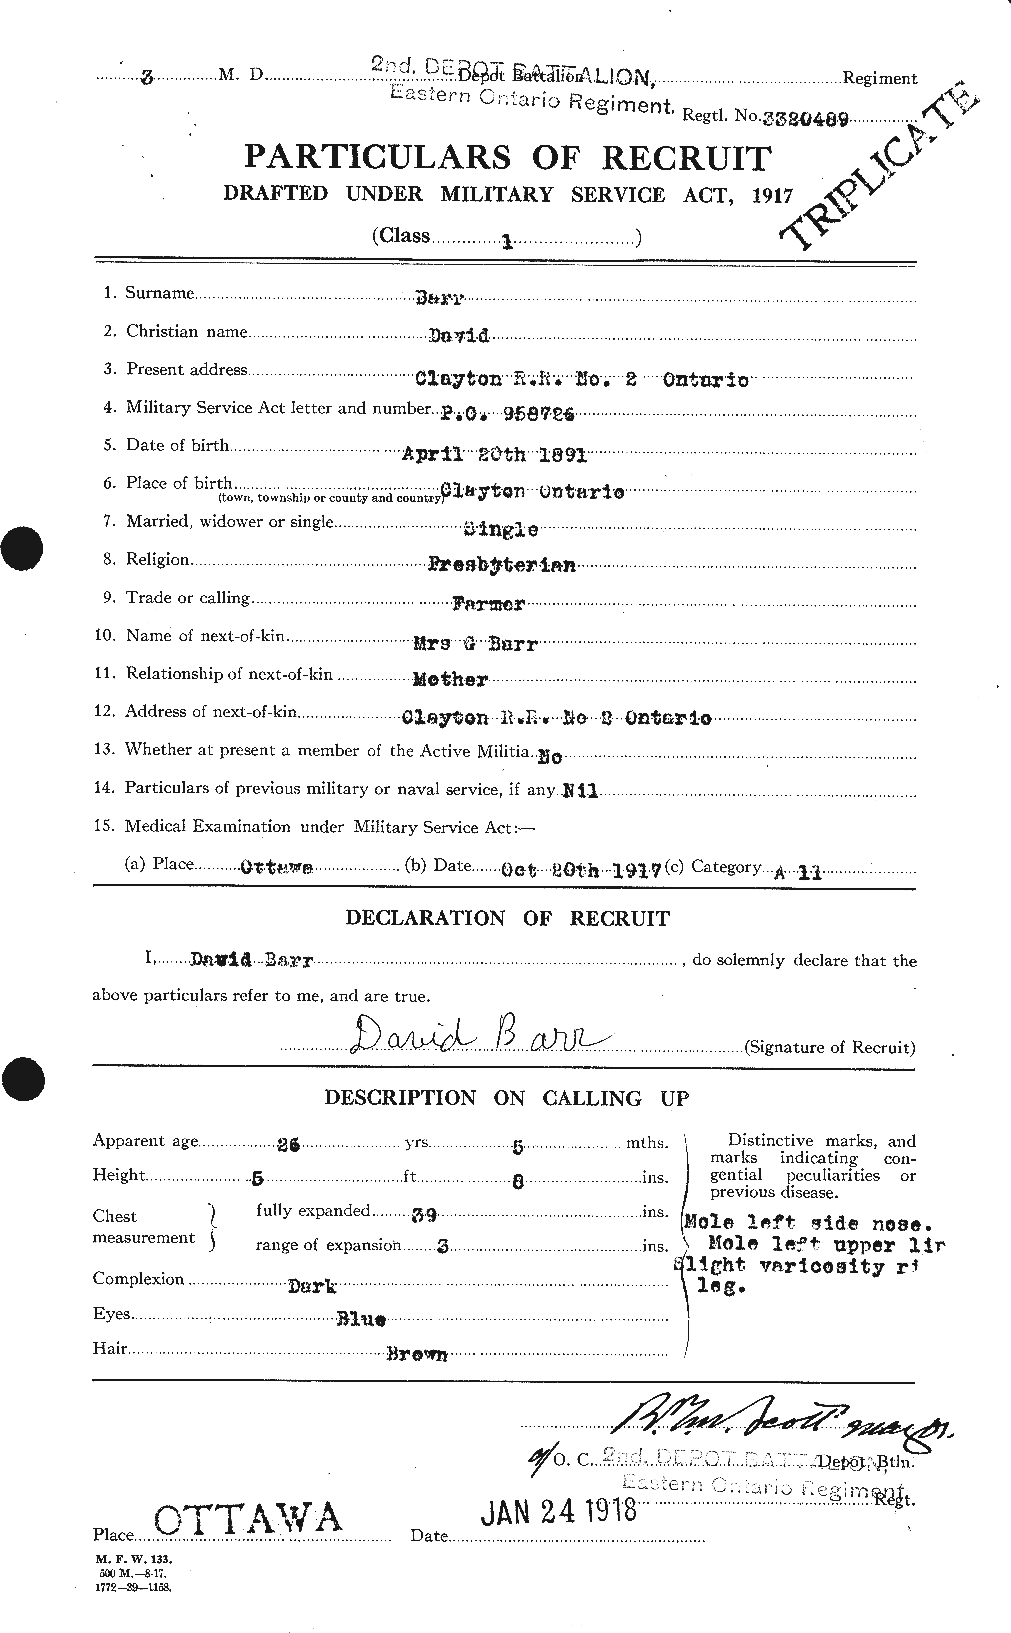 Personnel Records of the First World War - CEF 221812a